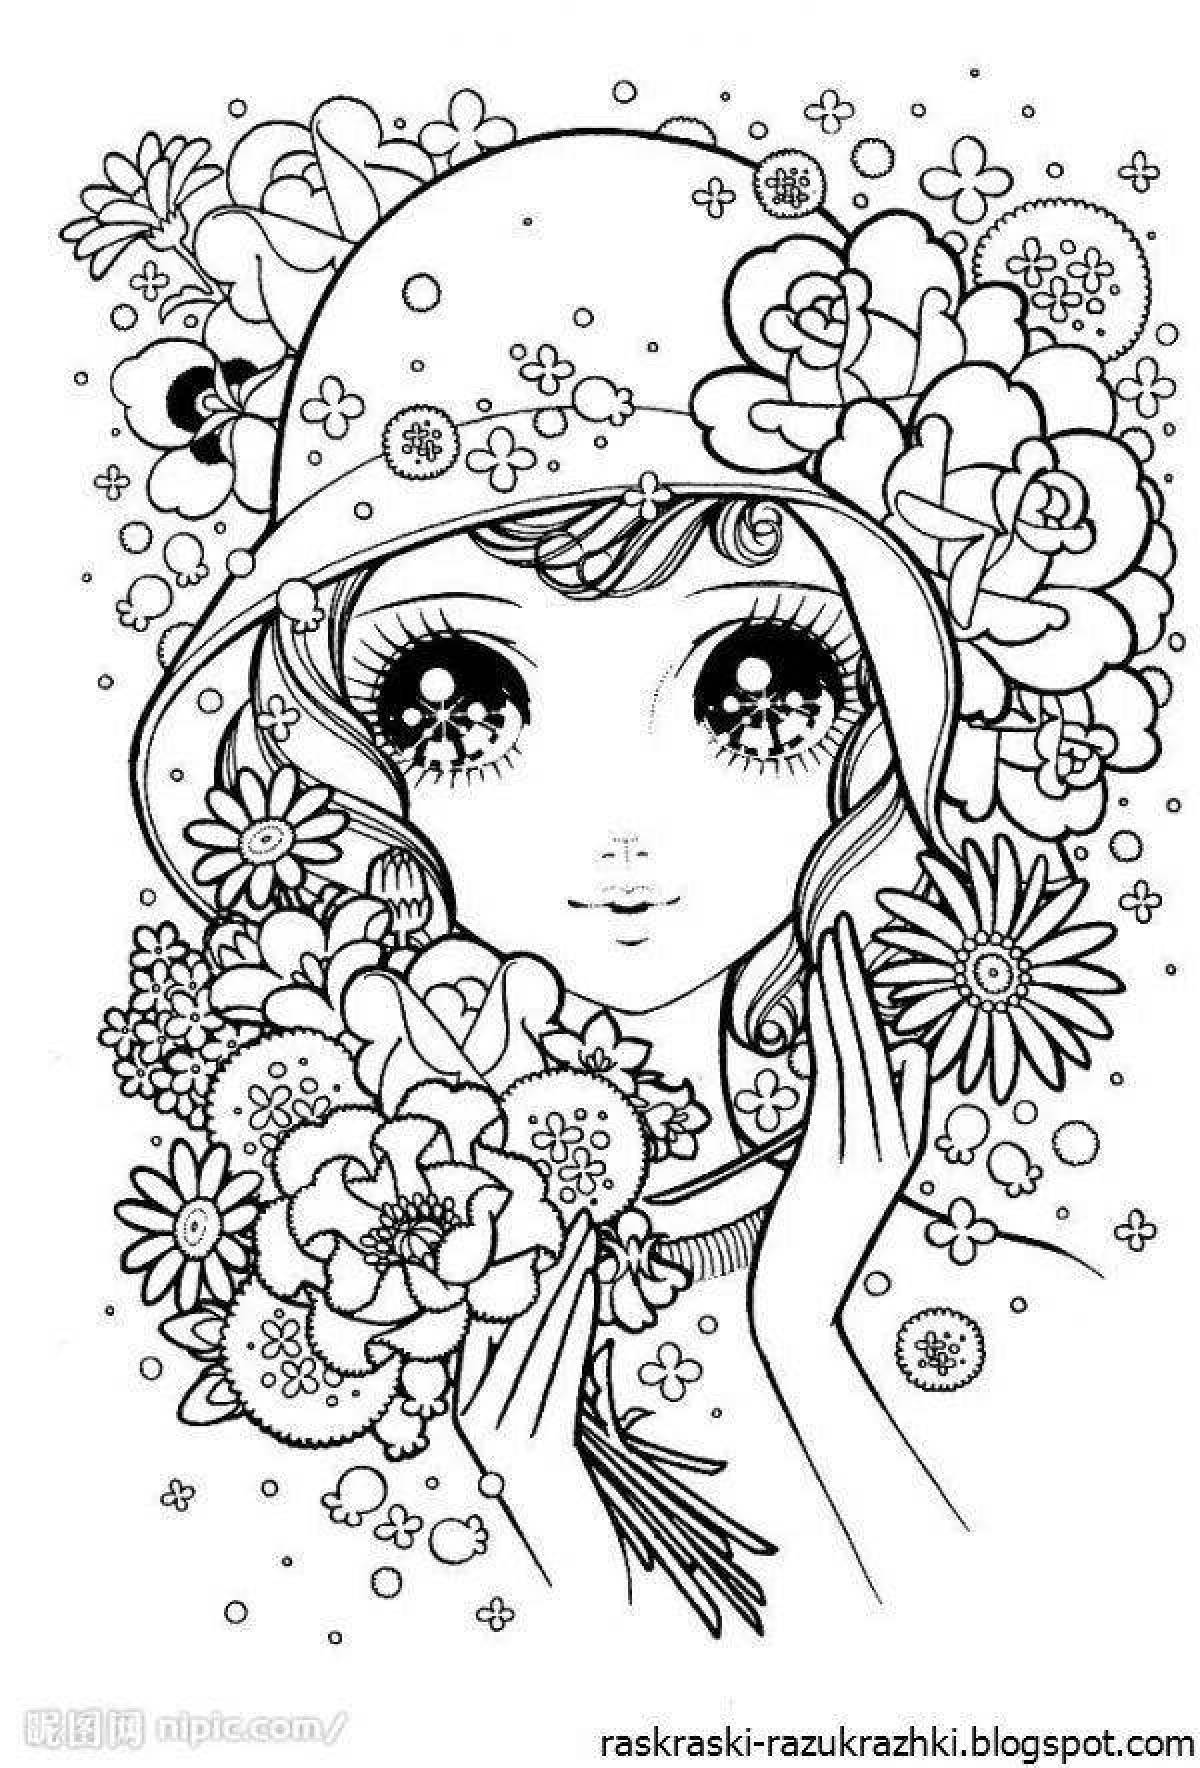 Nice coloring book for girls is the best in the world